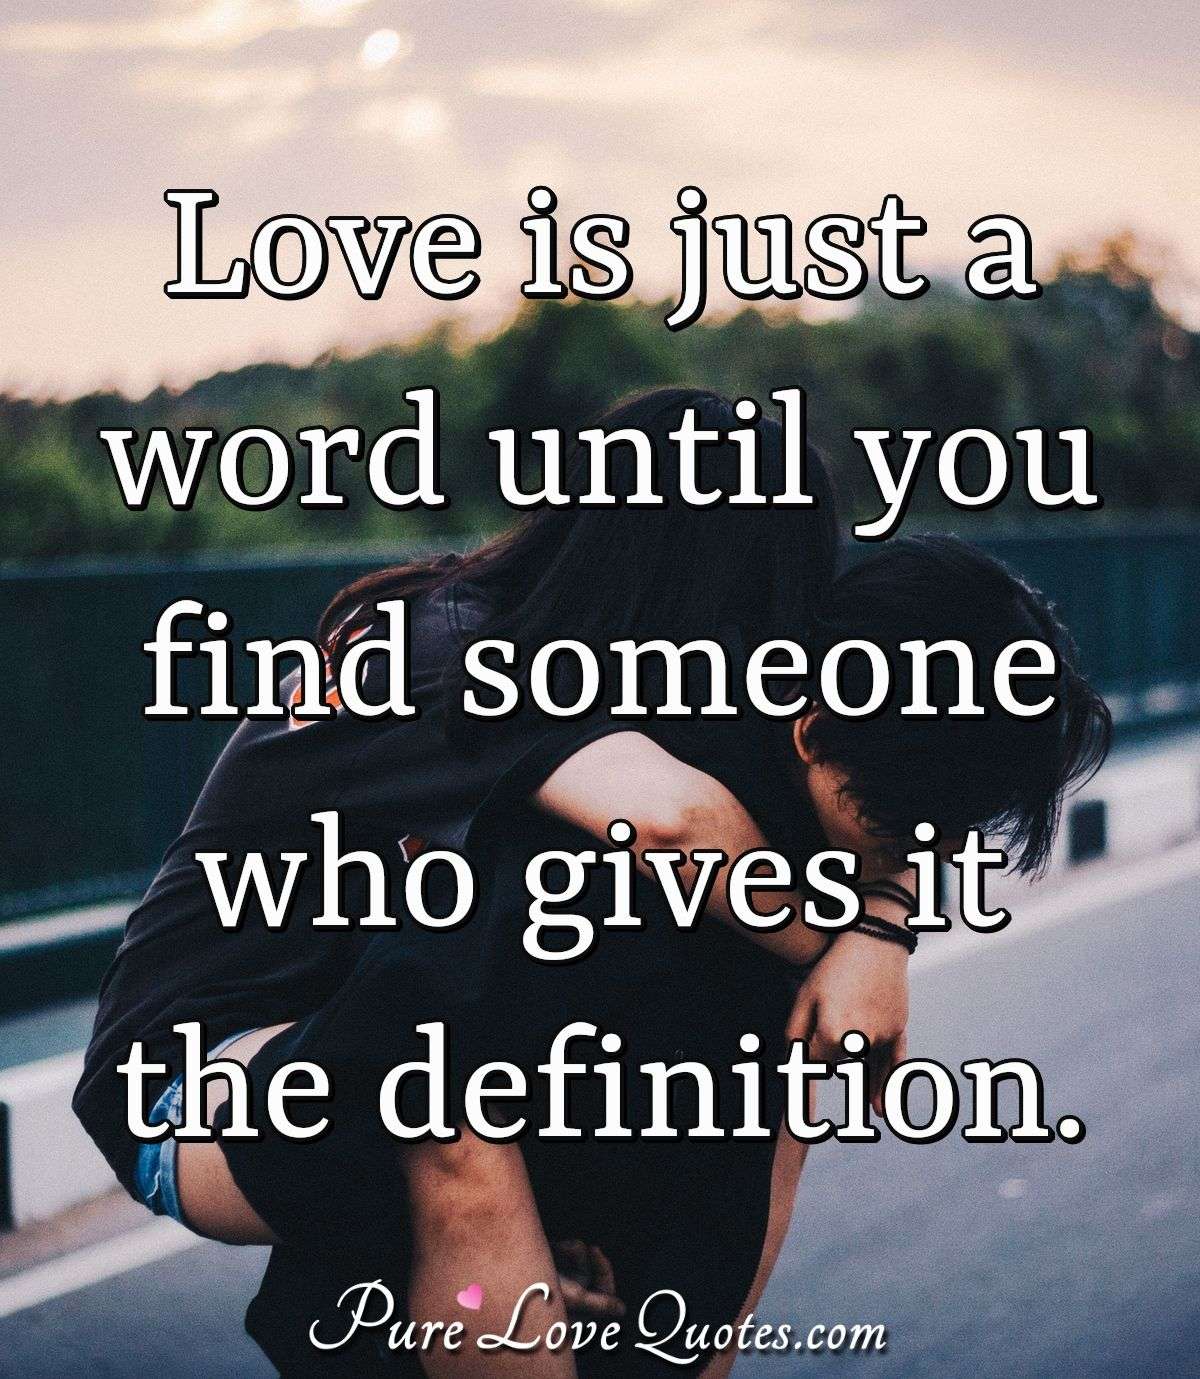 Love is just a word until you find someone who gives it the definition. - Anonymous